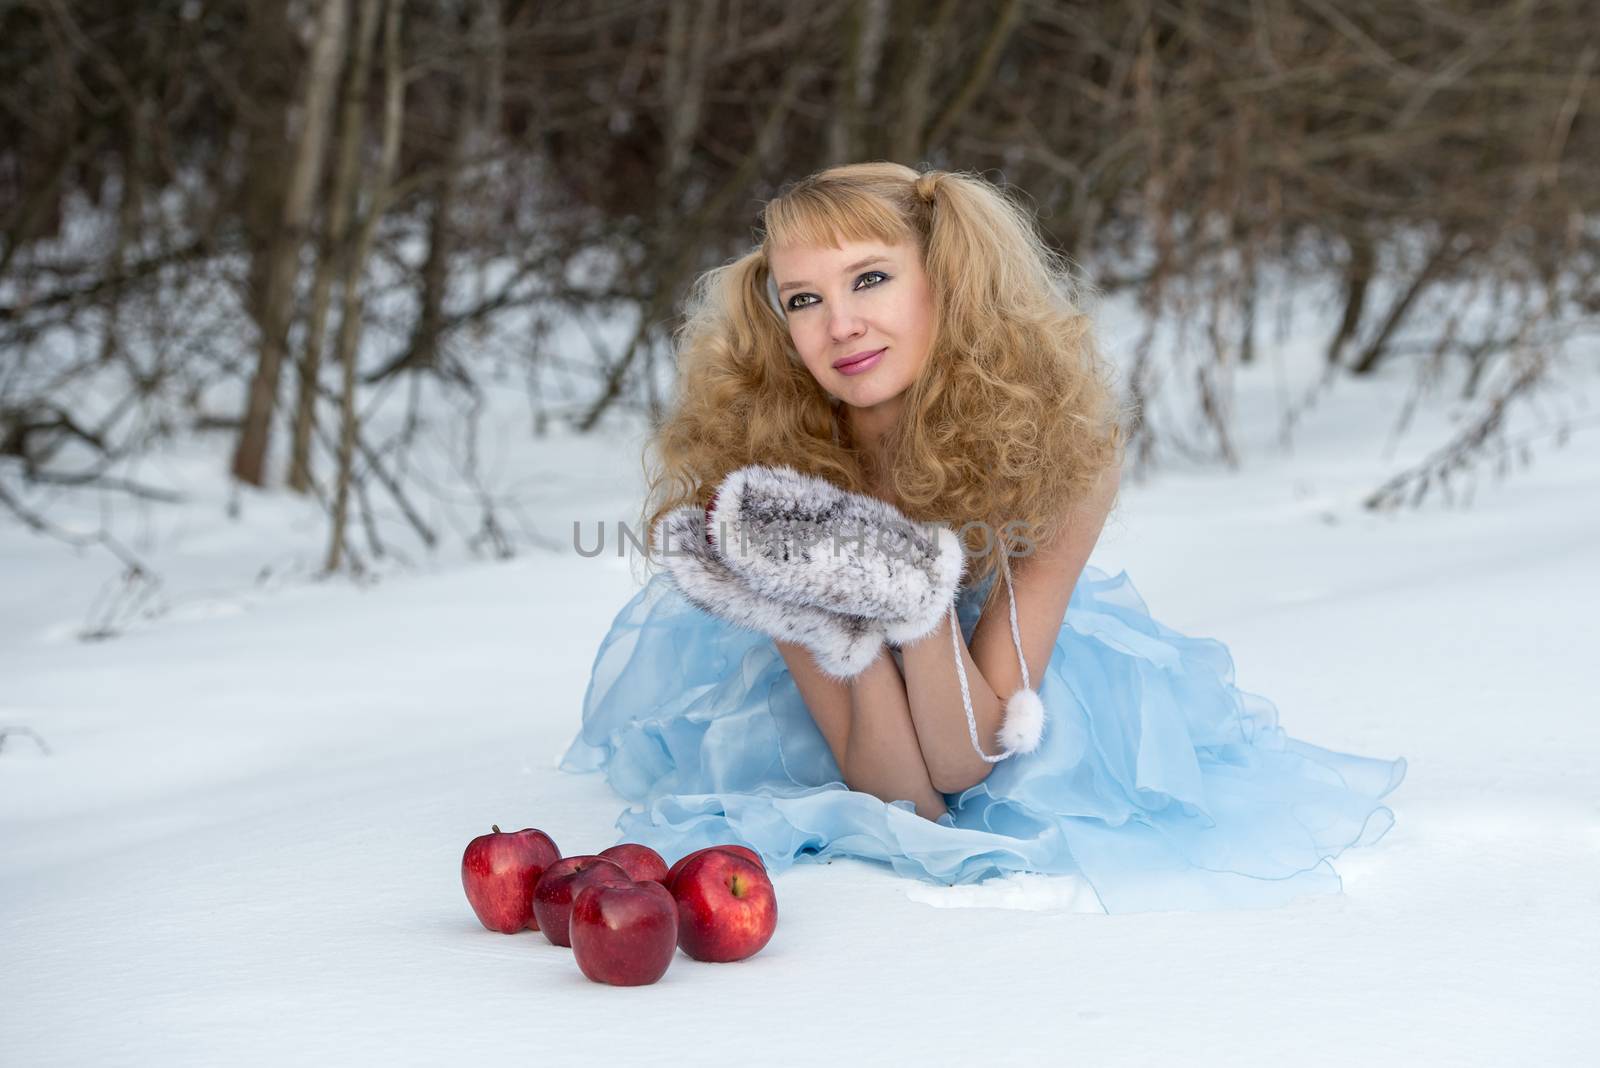 Appealing young Snow Maiden - the grandaughter of Father Frost - in transparent blue dress poses at winter forest with apples